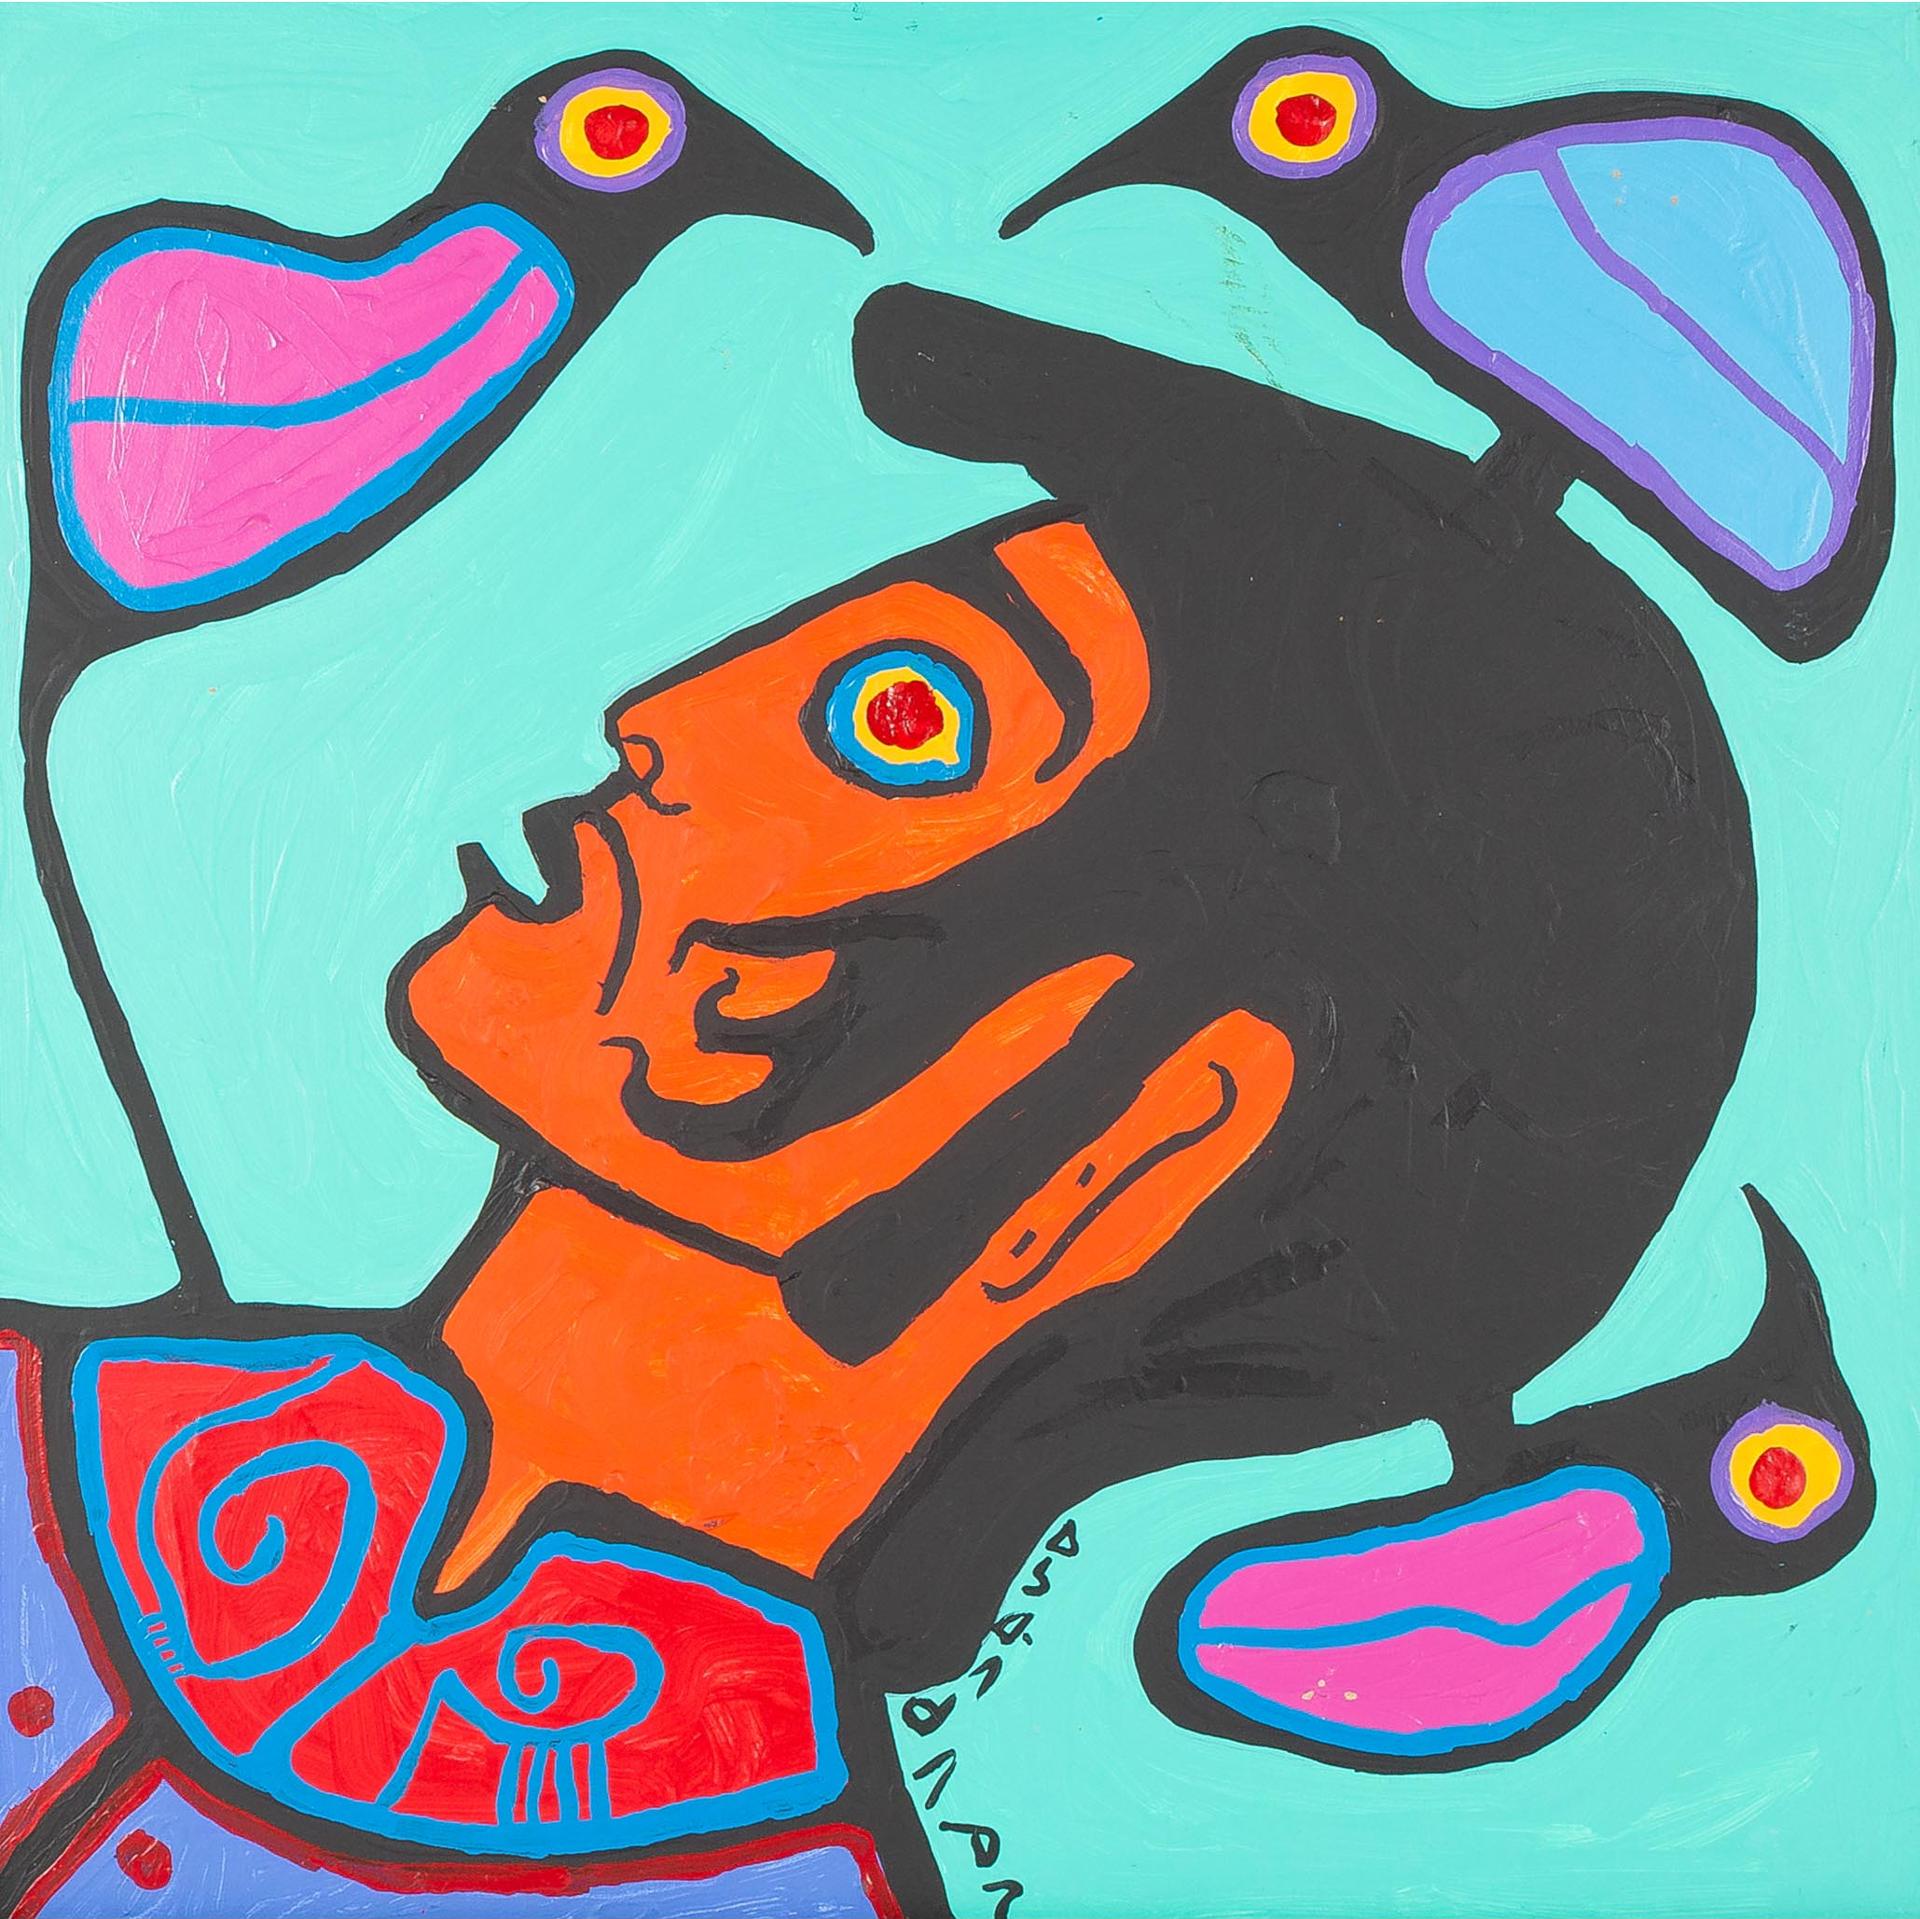 Norval H. Morrisseau (1931-2007) - Man With Birds